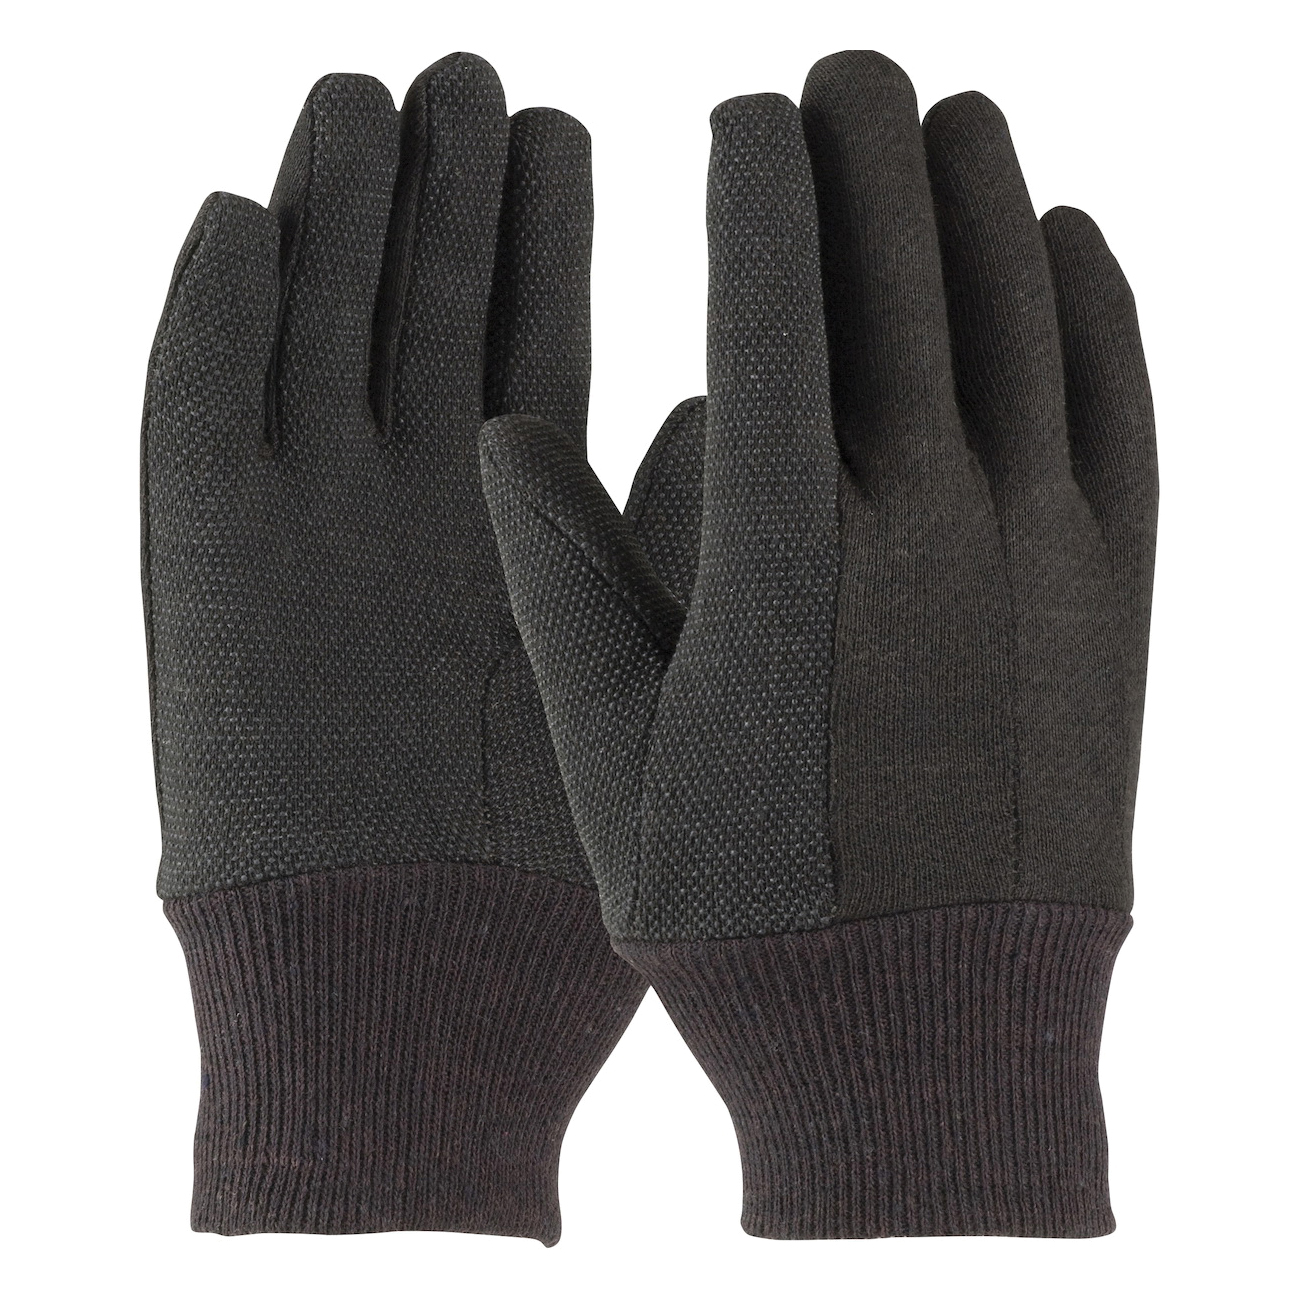 PIP® 95-809PDC Ladies Regular Weight General Purpose Gloves, Fabric/Work, Clute Cut/Full Finger/Straight Thumb Style, PVC Palm, Cotton/Jersey/Polyester, Brown, Knit Wrist Cuff, PVC Coating, Resists: Abrasion and Cut, Cotton/Polyester Lining